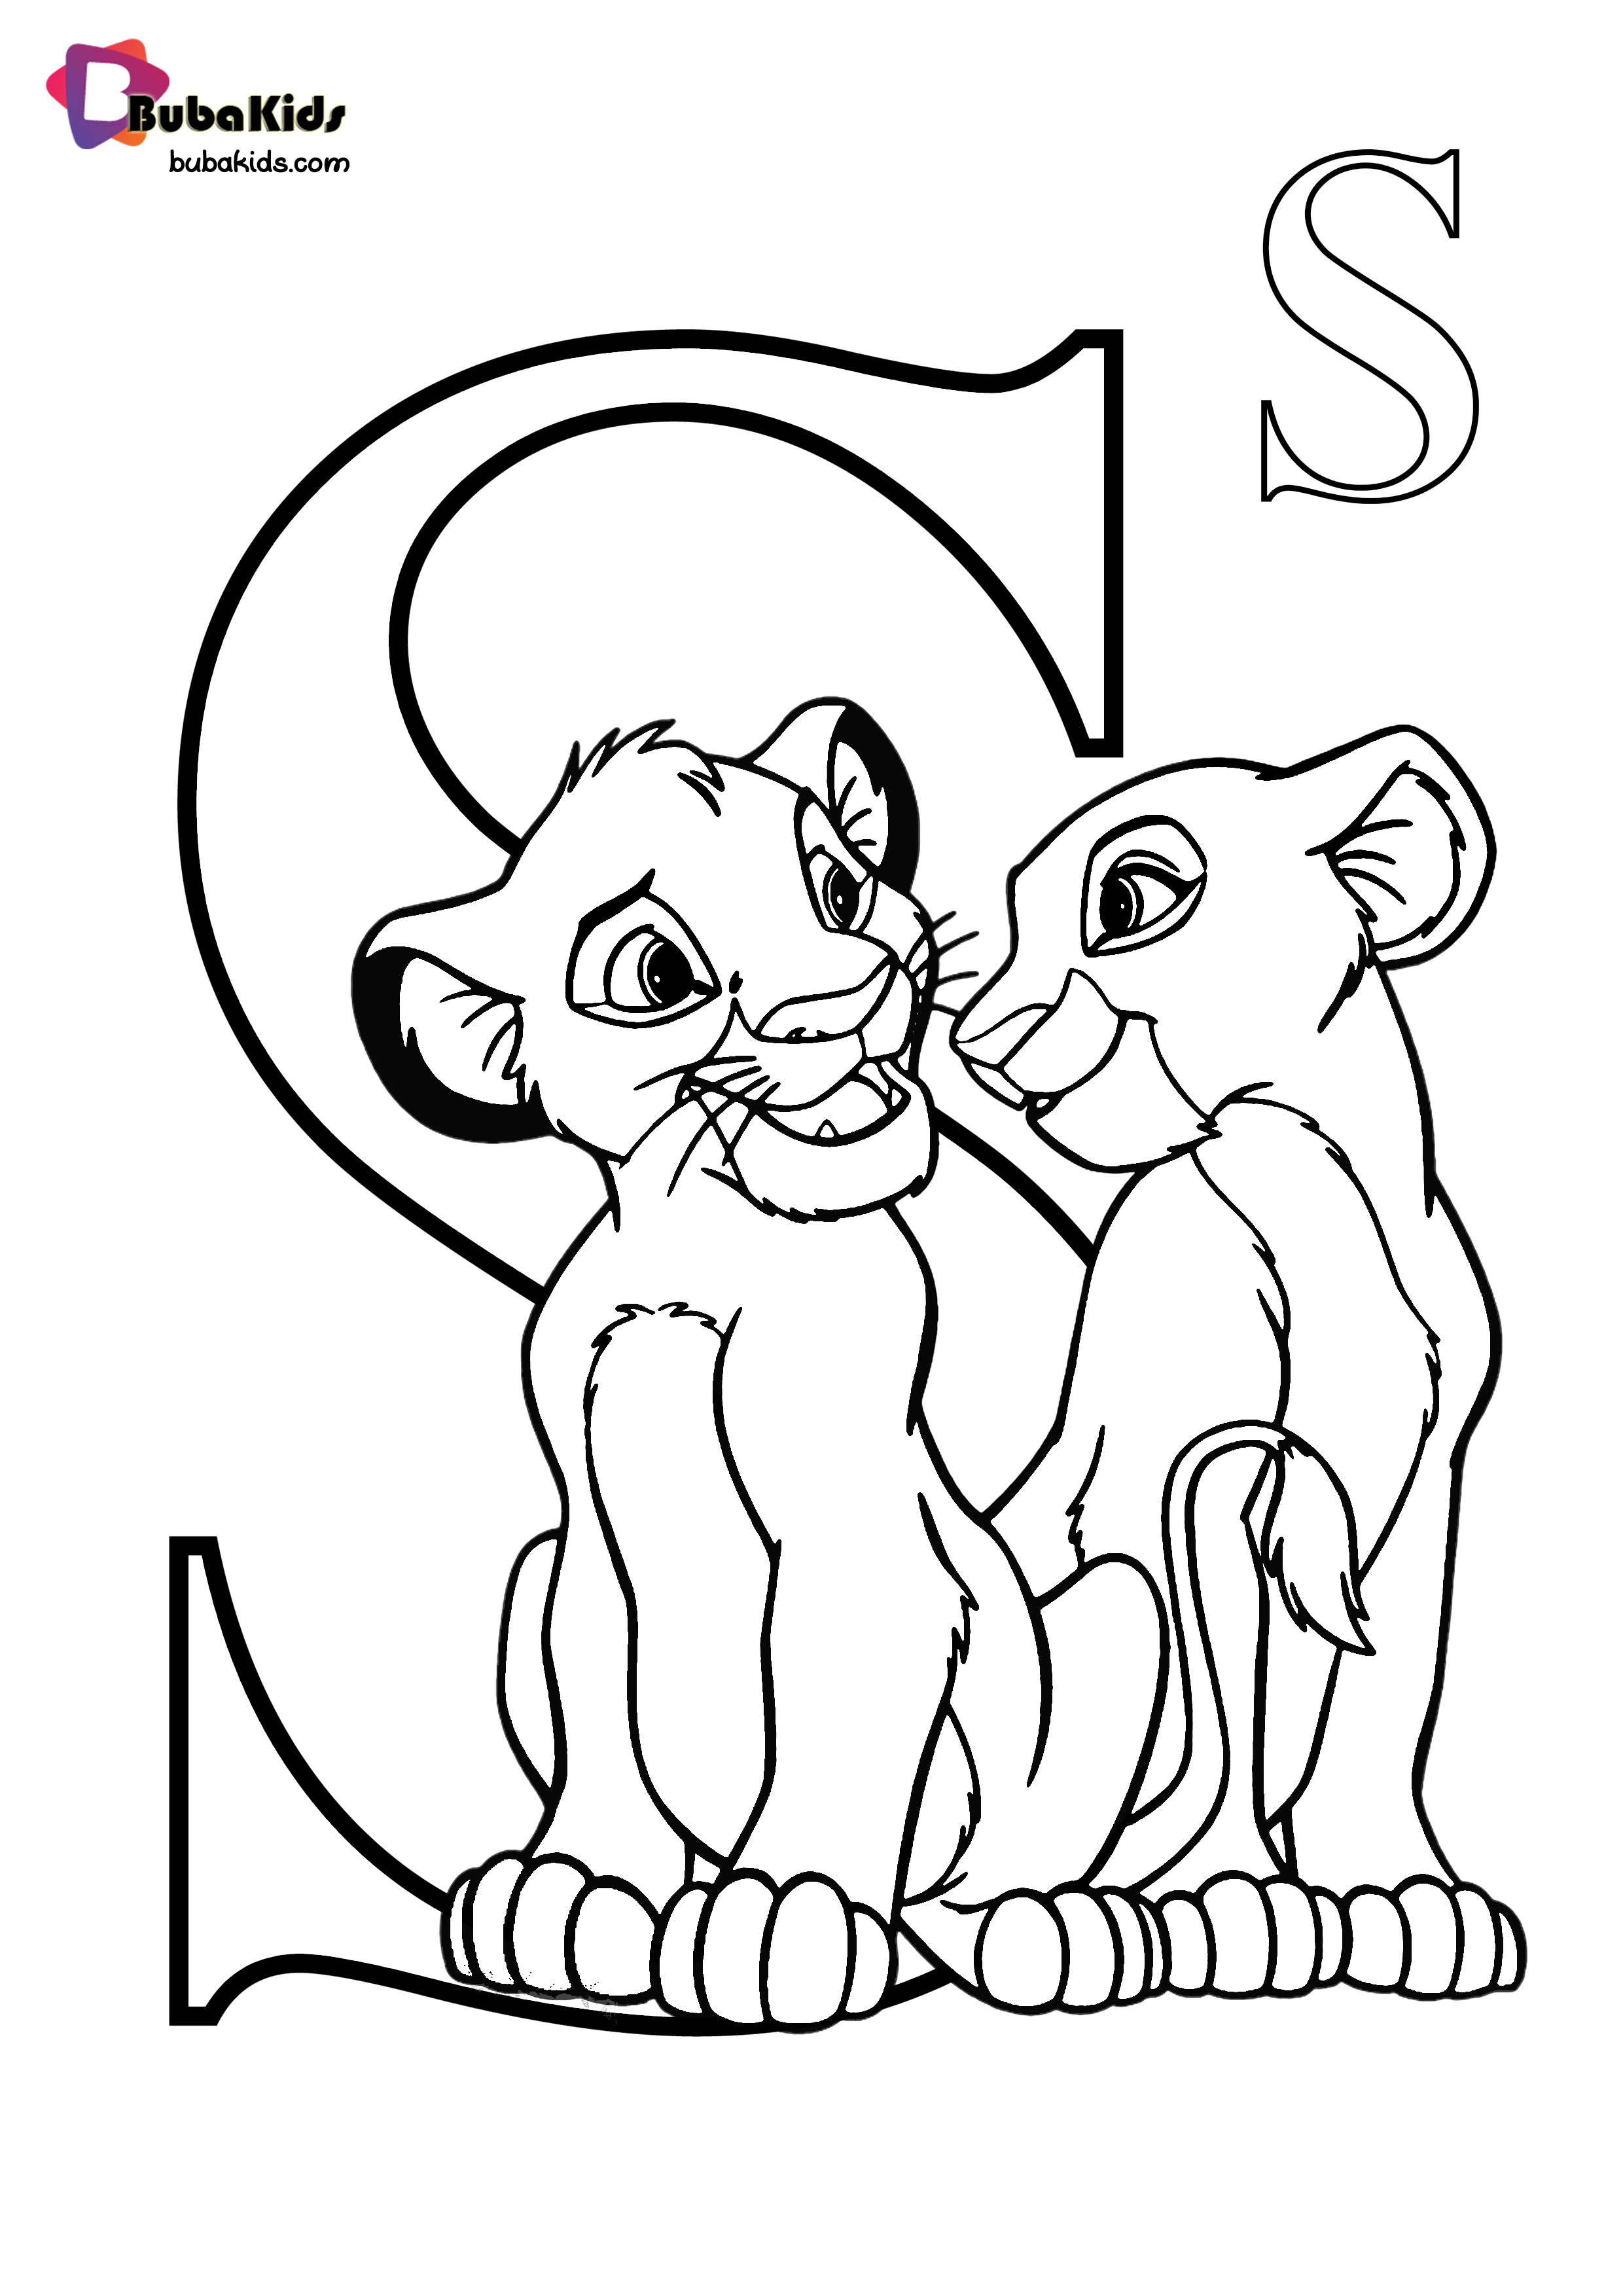 Simba Letter S Coloring Page for Toddler Wallpaper